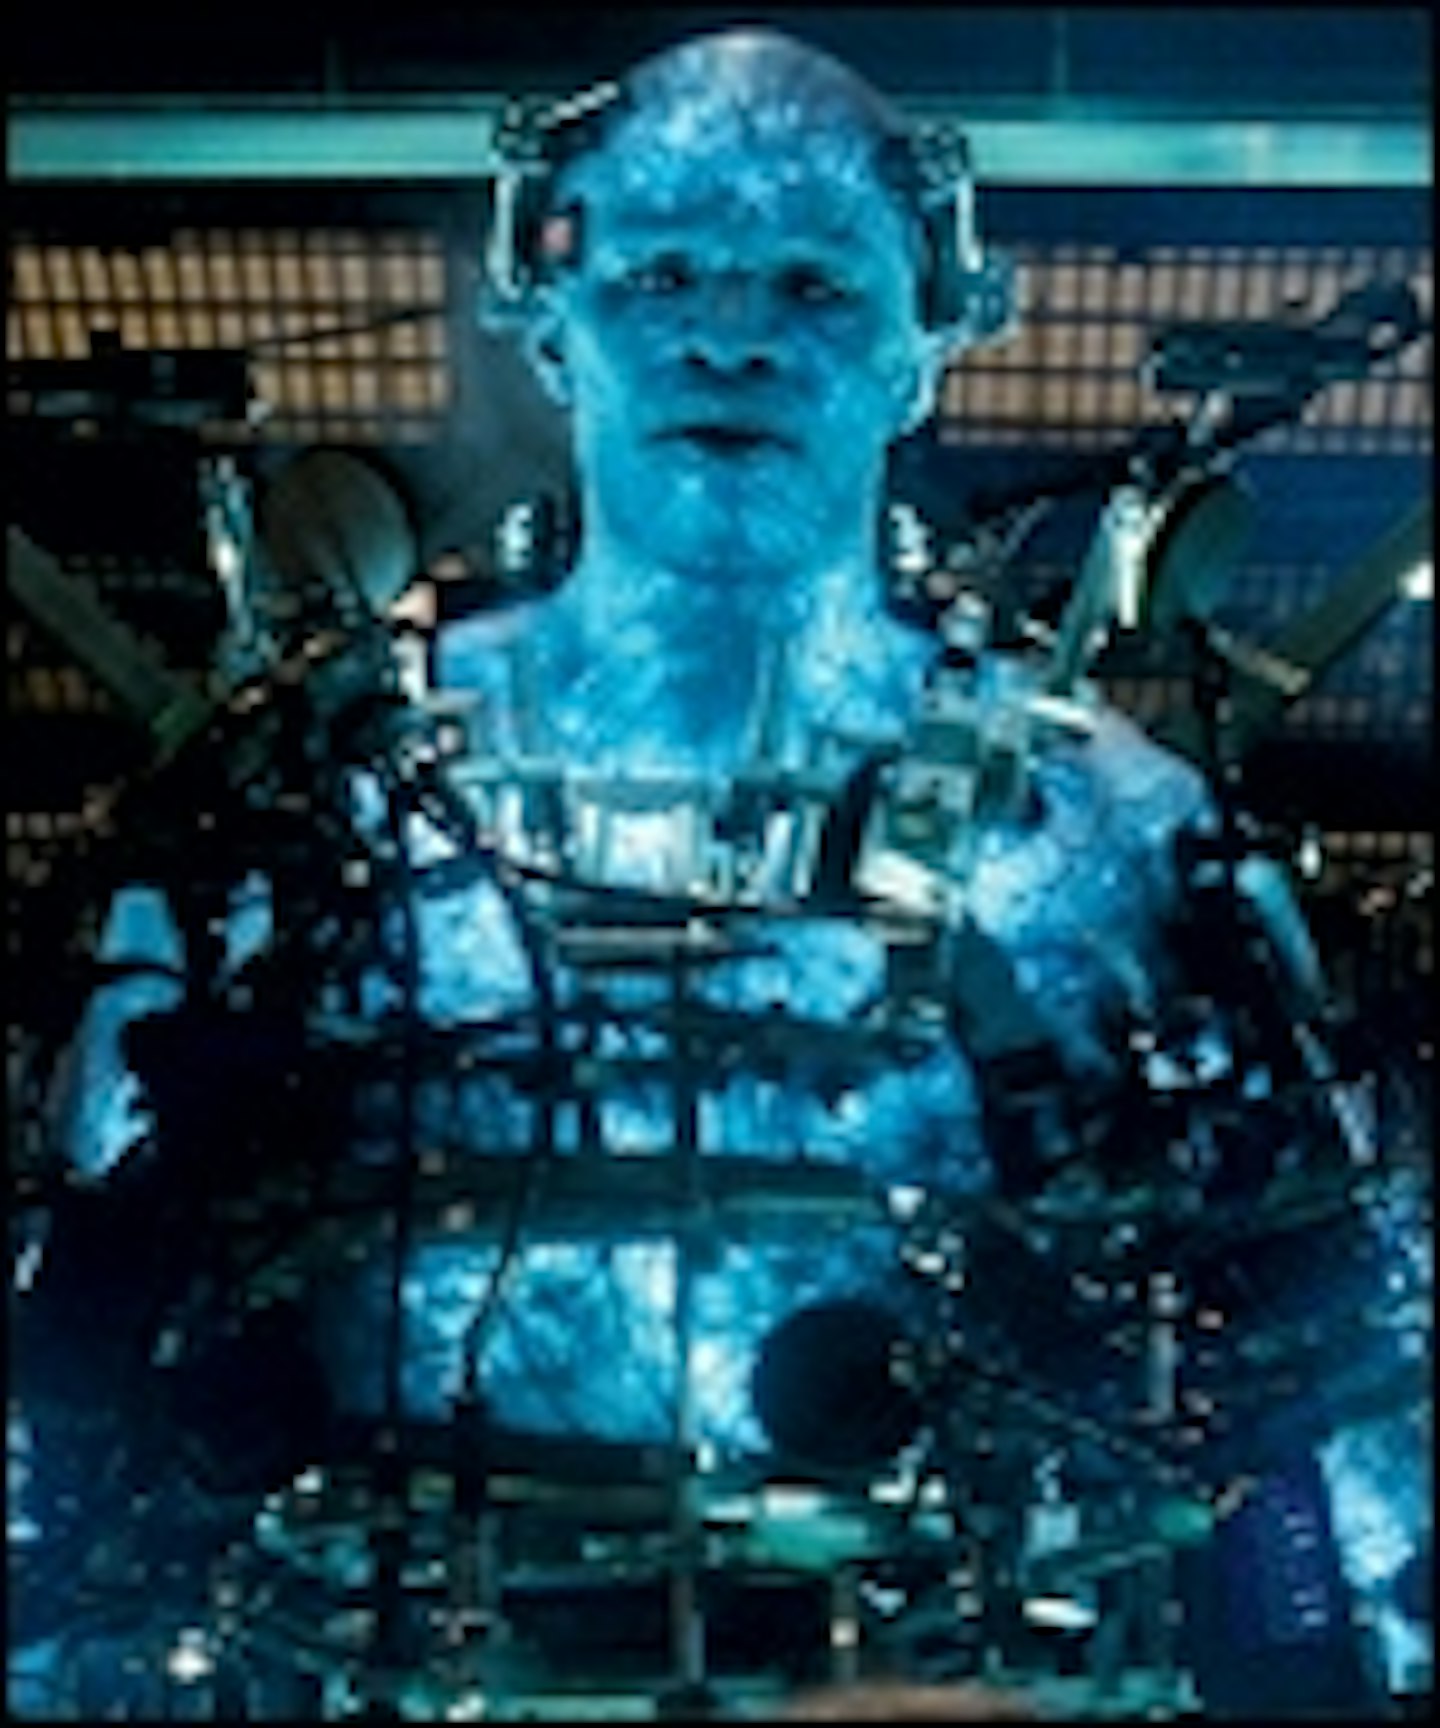 Two New Electro Stills From The Amazing Spider-Man 2